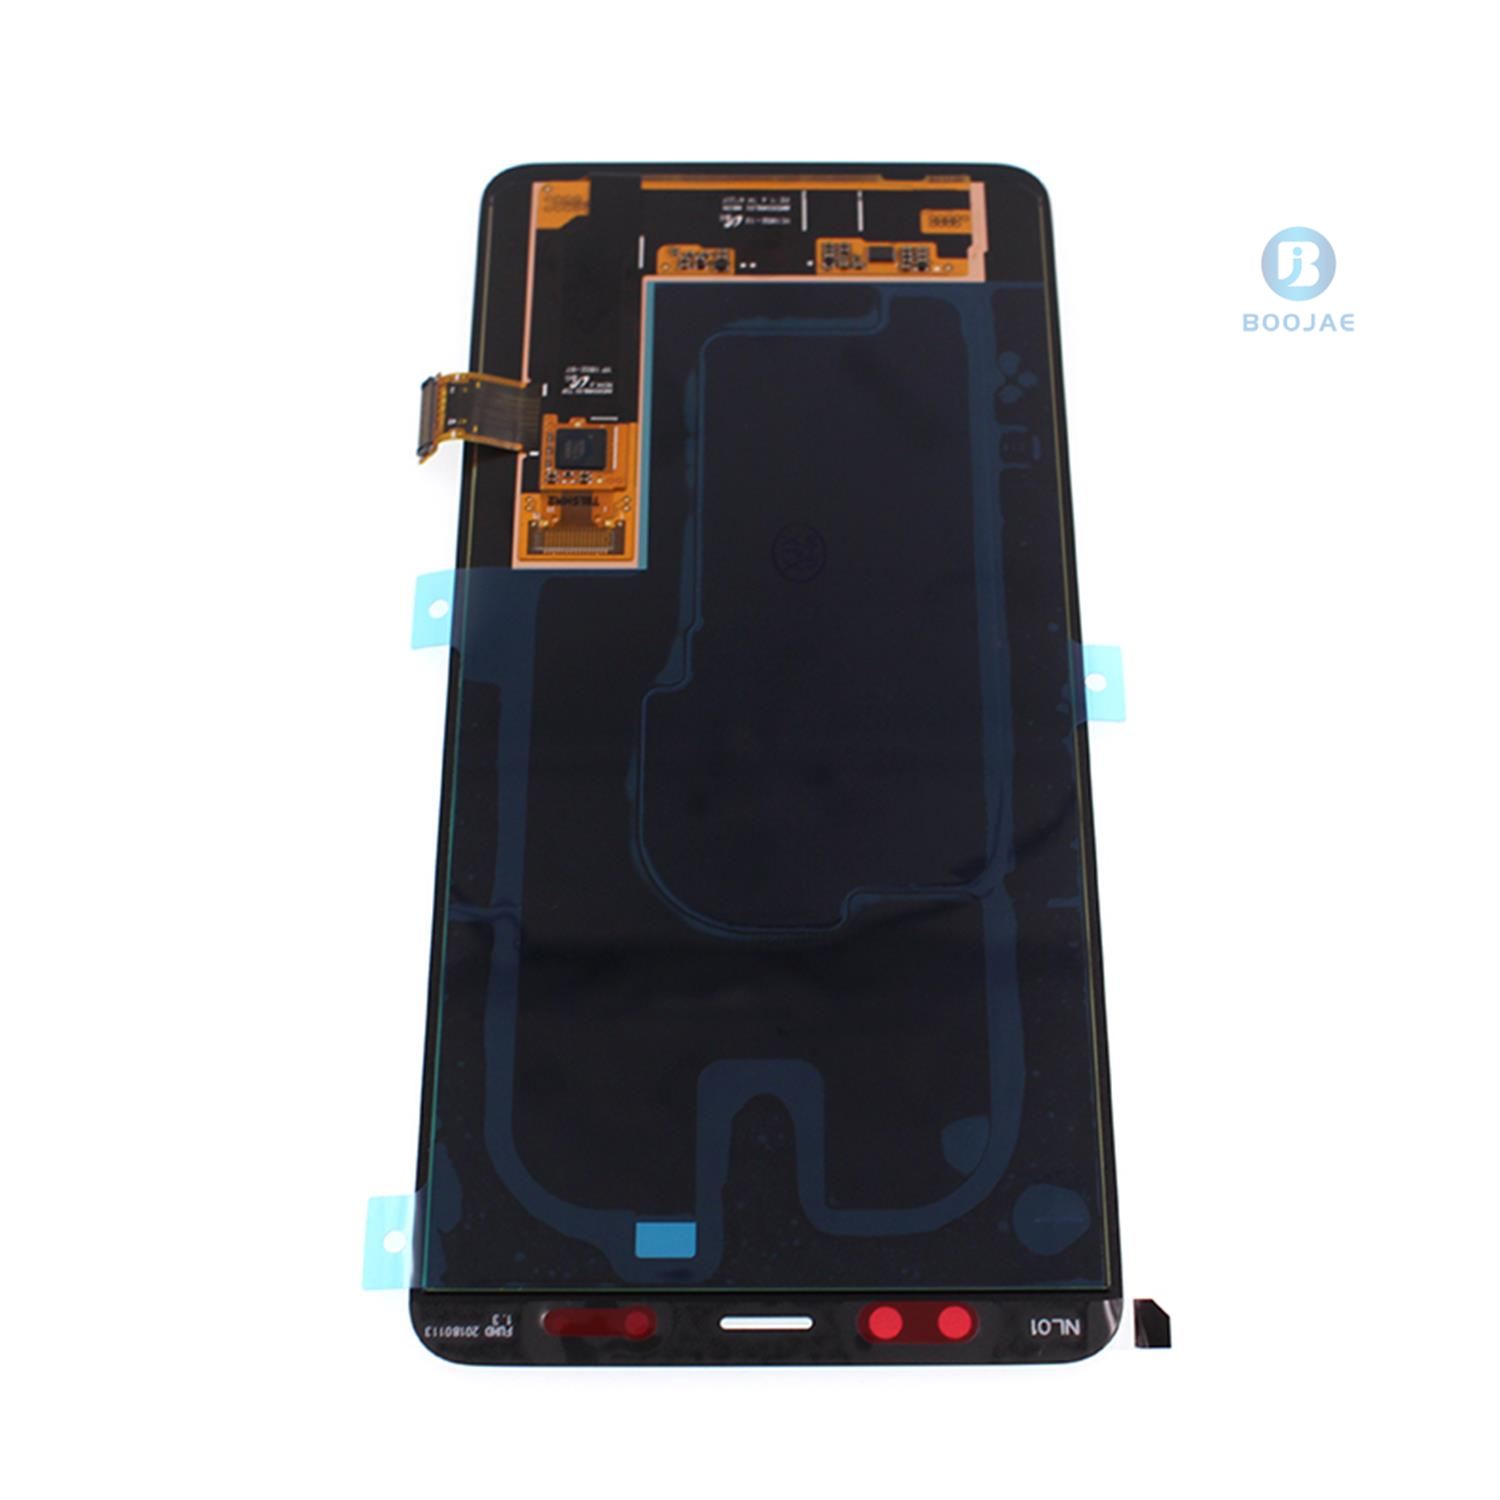 Samsung Galaxy A730 LCD Screen Display and Touch Panel Digitizer Assembly Replacement